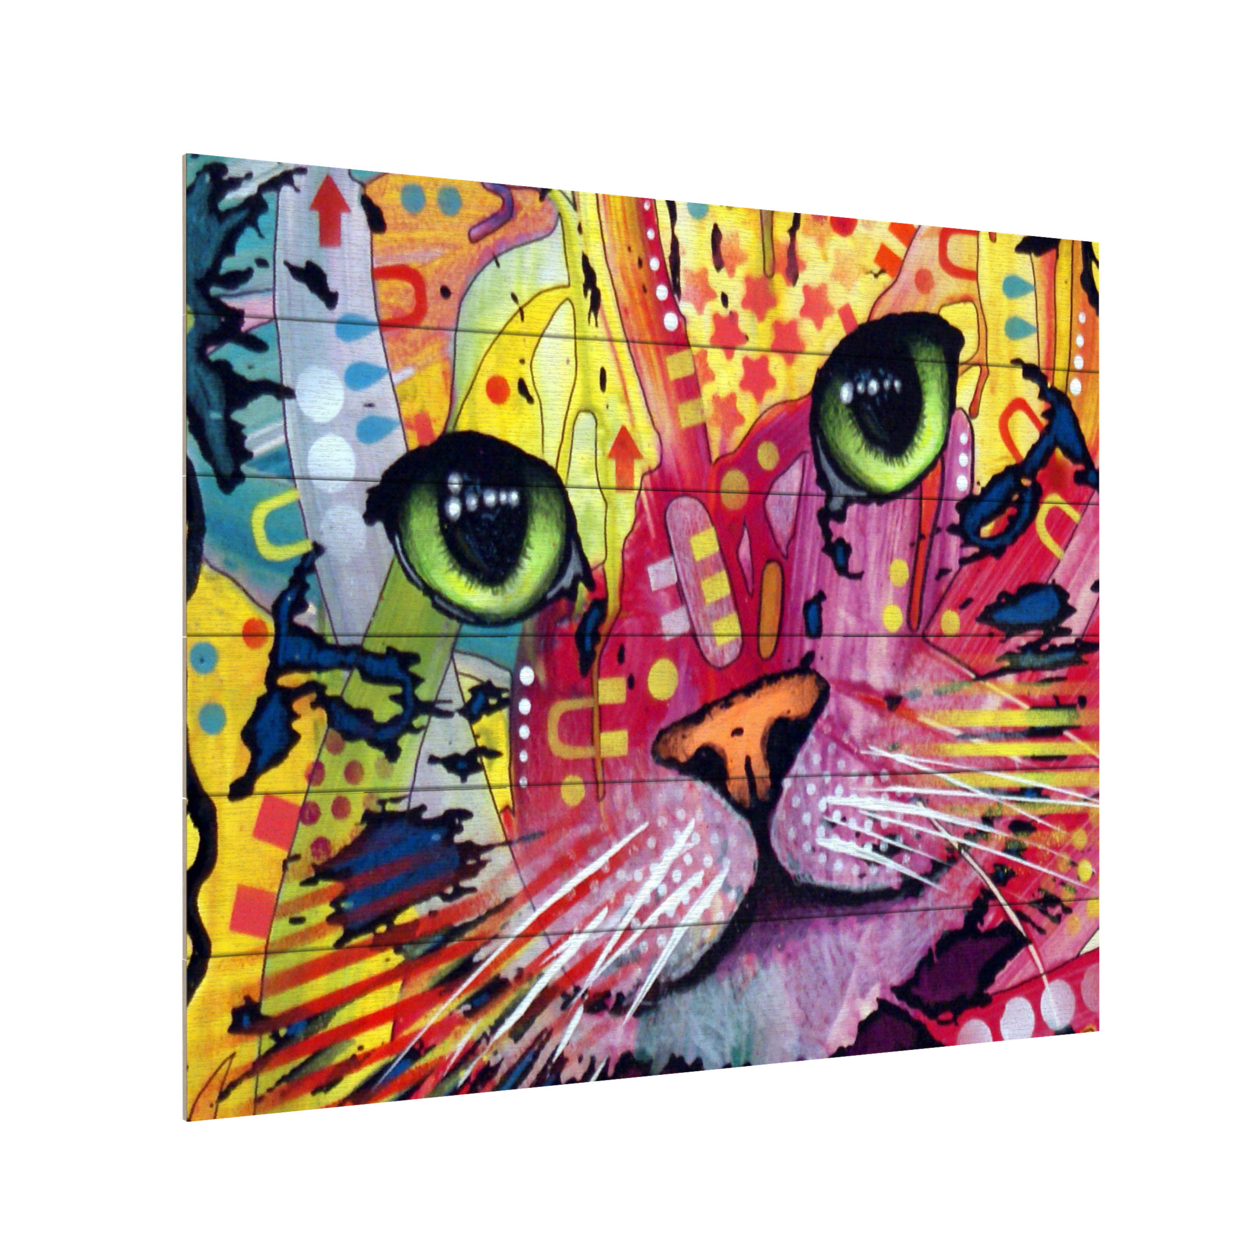 Wooden Slat Art 18 X 22 Inches Titled Tilt Cat Ready To Hang Home Decor Picture